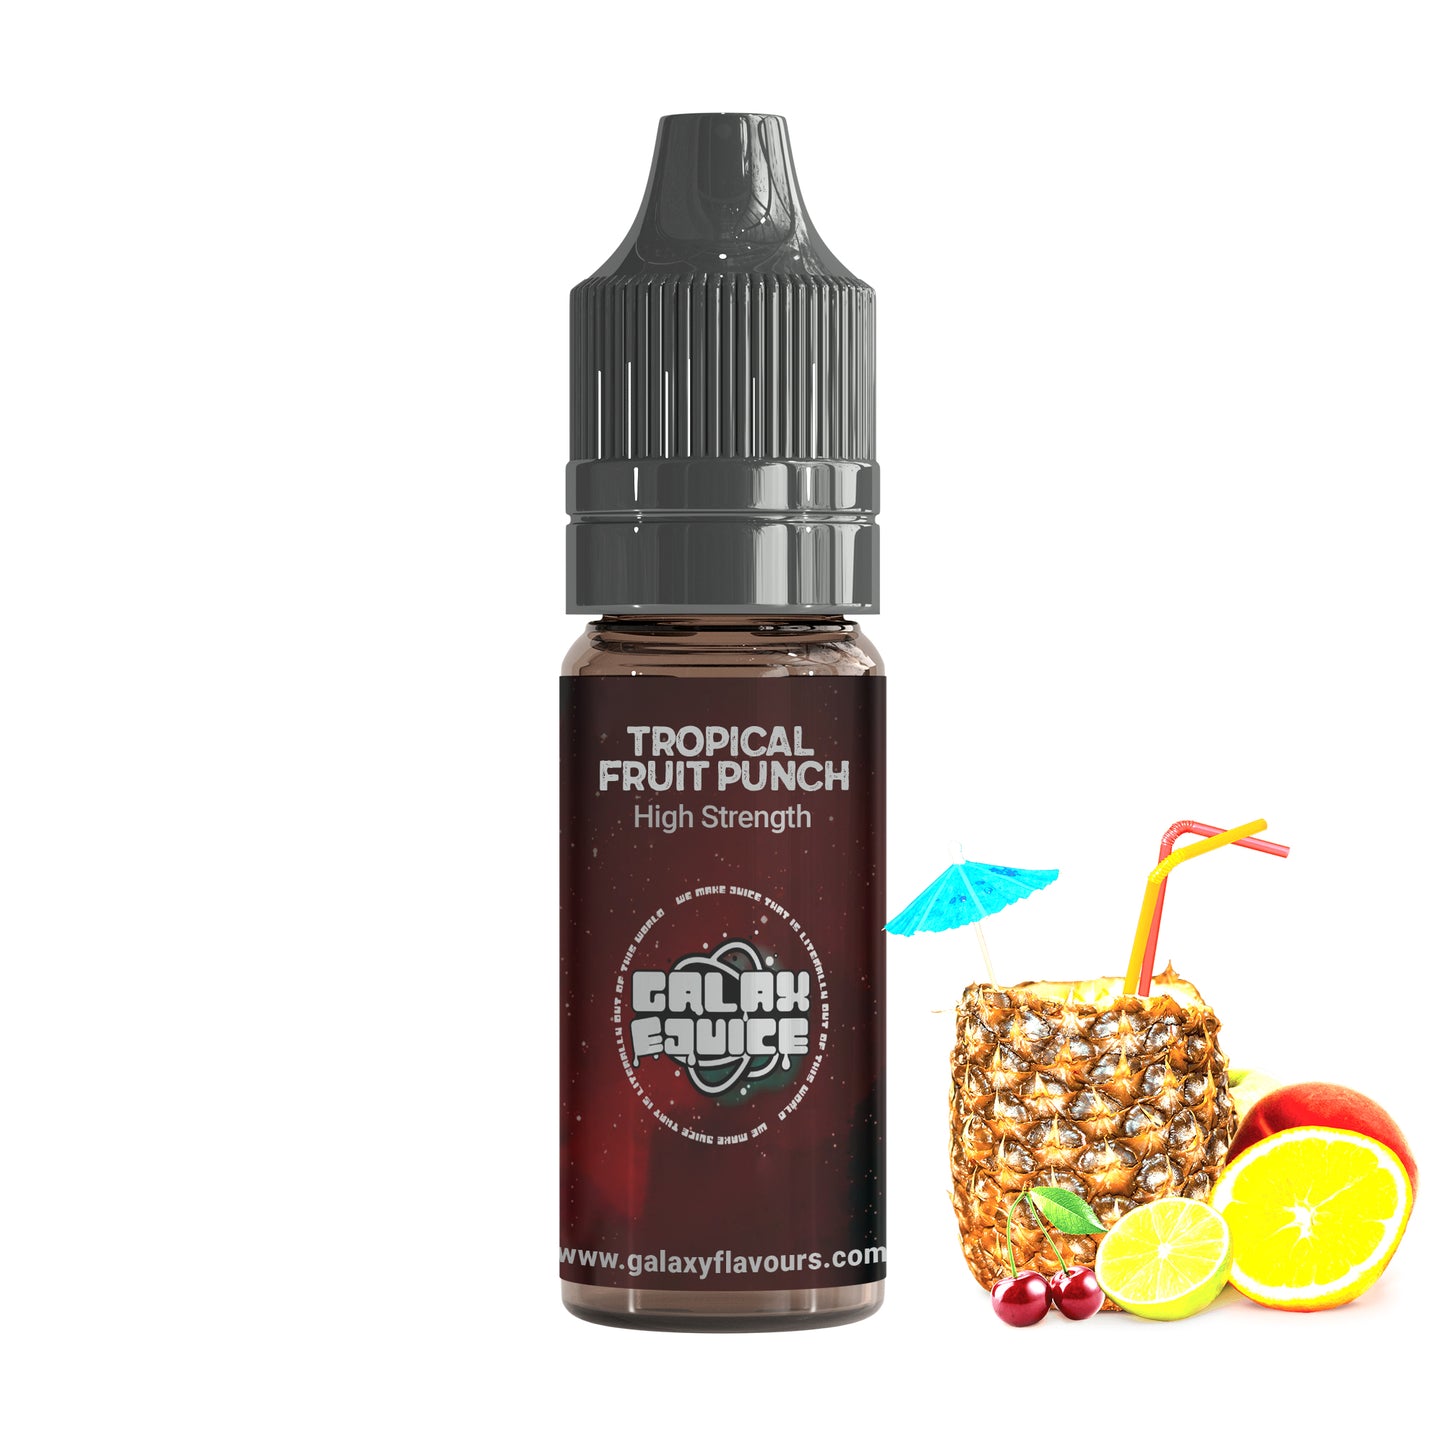 Tropical Fruit Punch High Strength Professional Flavouring.